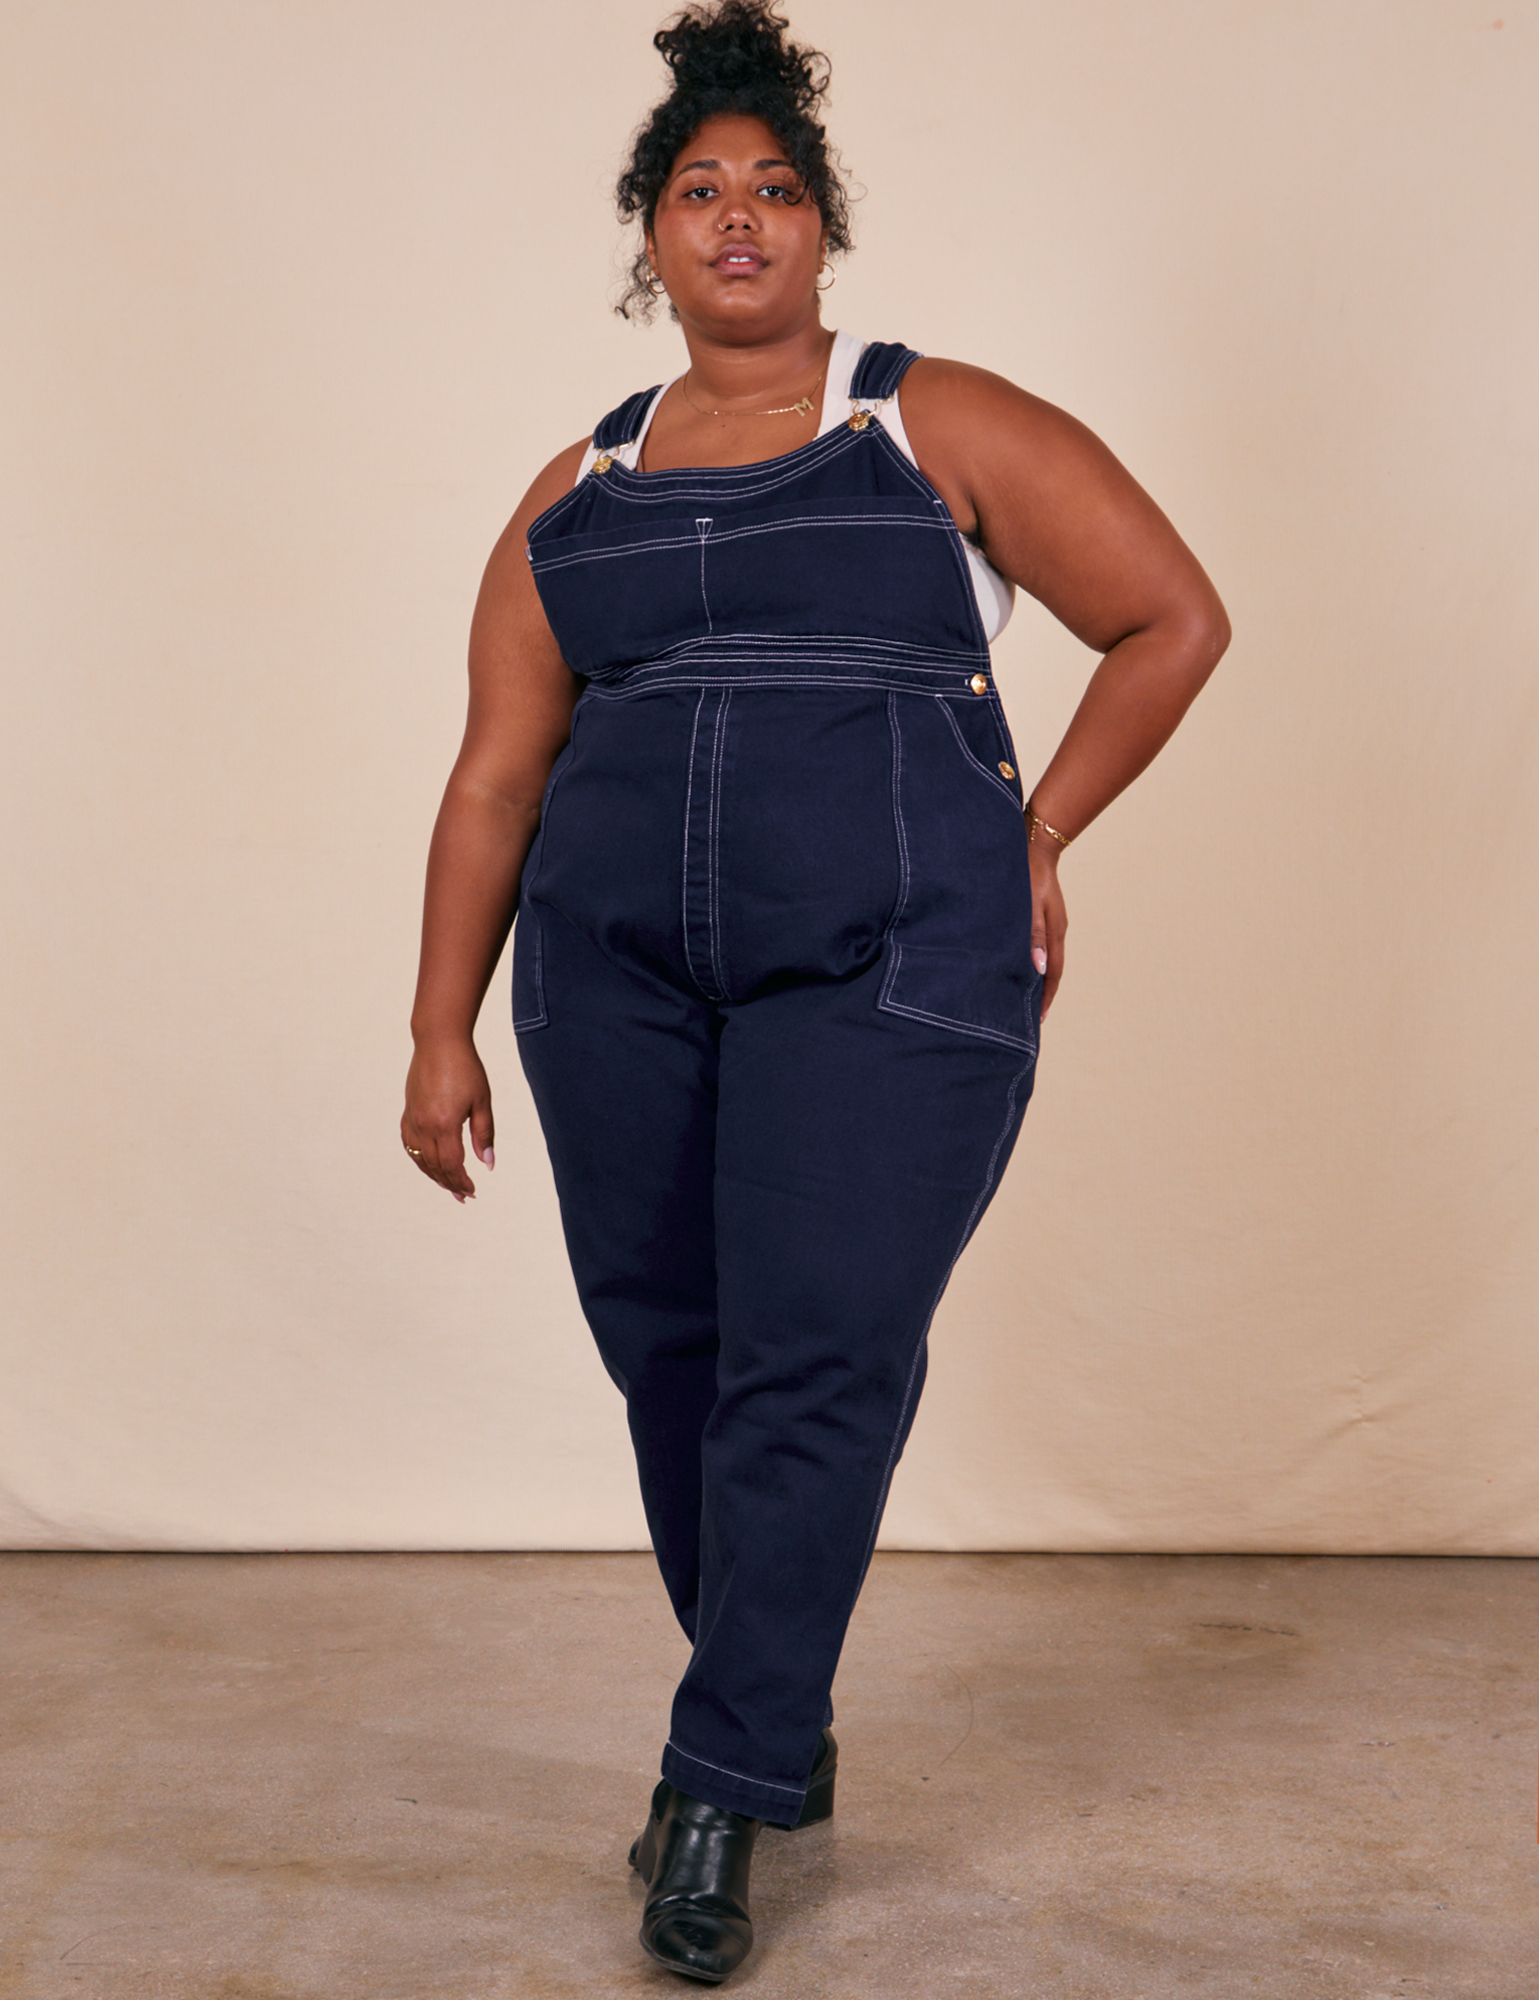 Morgan is 5&#39;5&quot; and wearing 1XL Original Overalls in Navy Blue